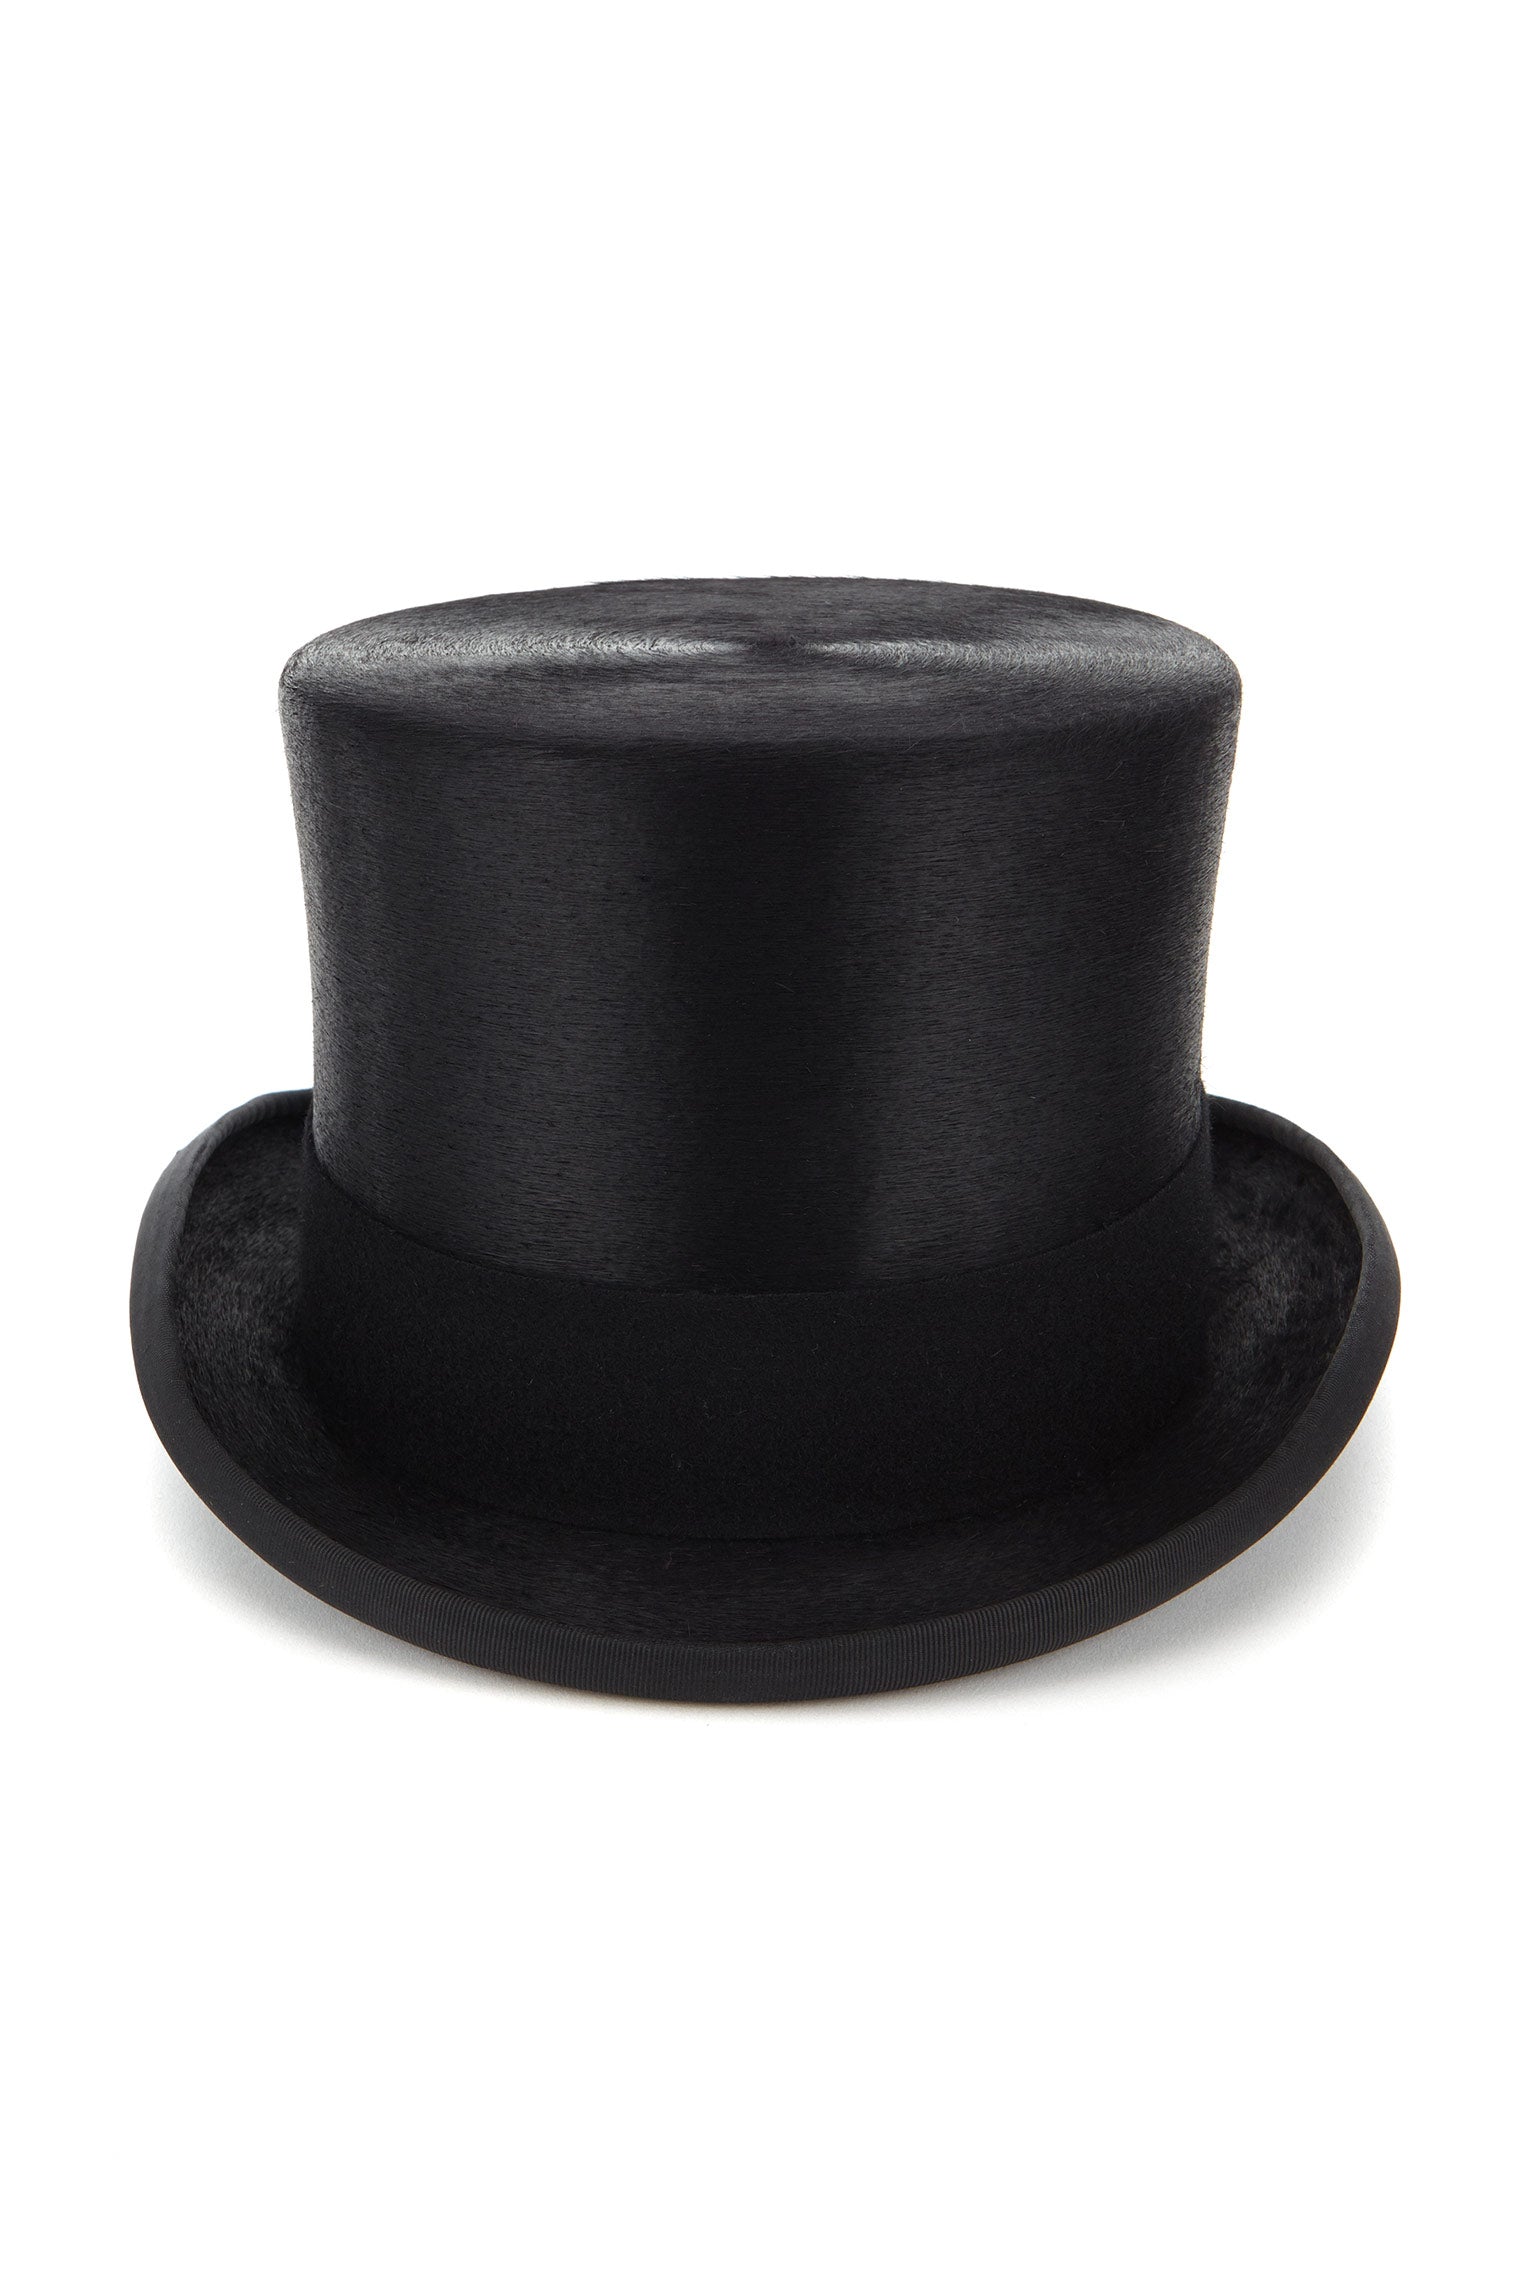 Westminster Top Hat - Royal Ascot Hats - Lock & Co. Hatters London UK